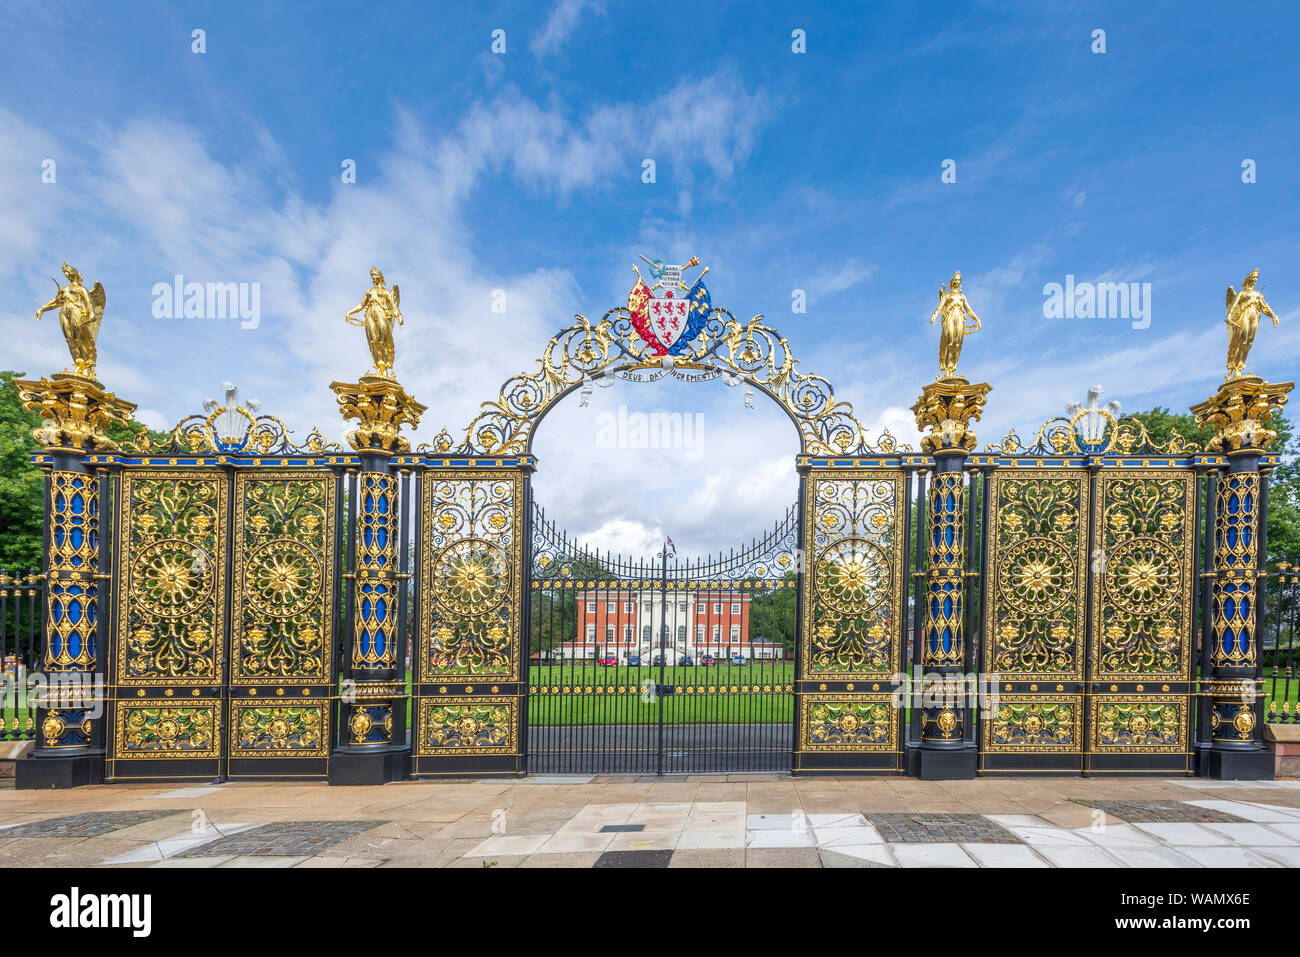 The refurbished in June 2019 Golden Gates of Warrington town hall. The Victorian gates were originally intended for Queen Victoria at Sandringham. Stock Photo